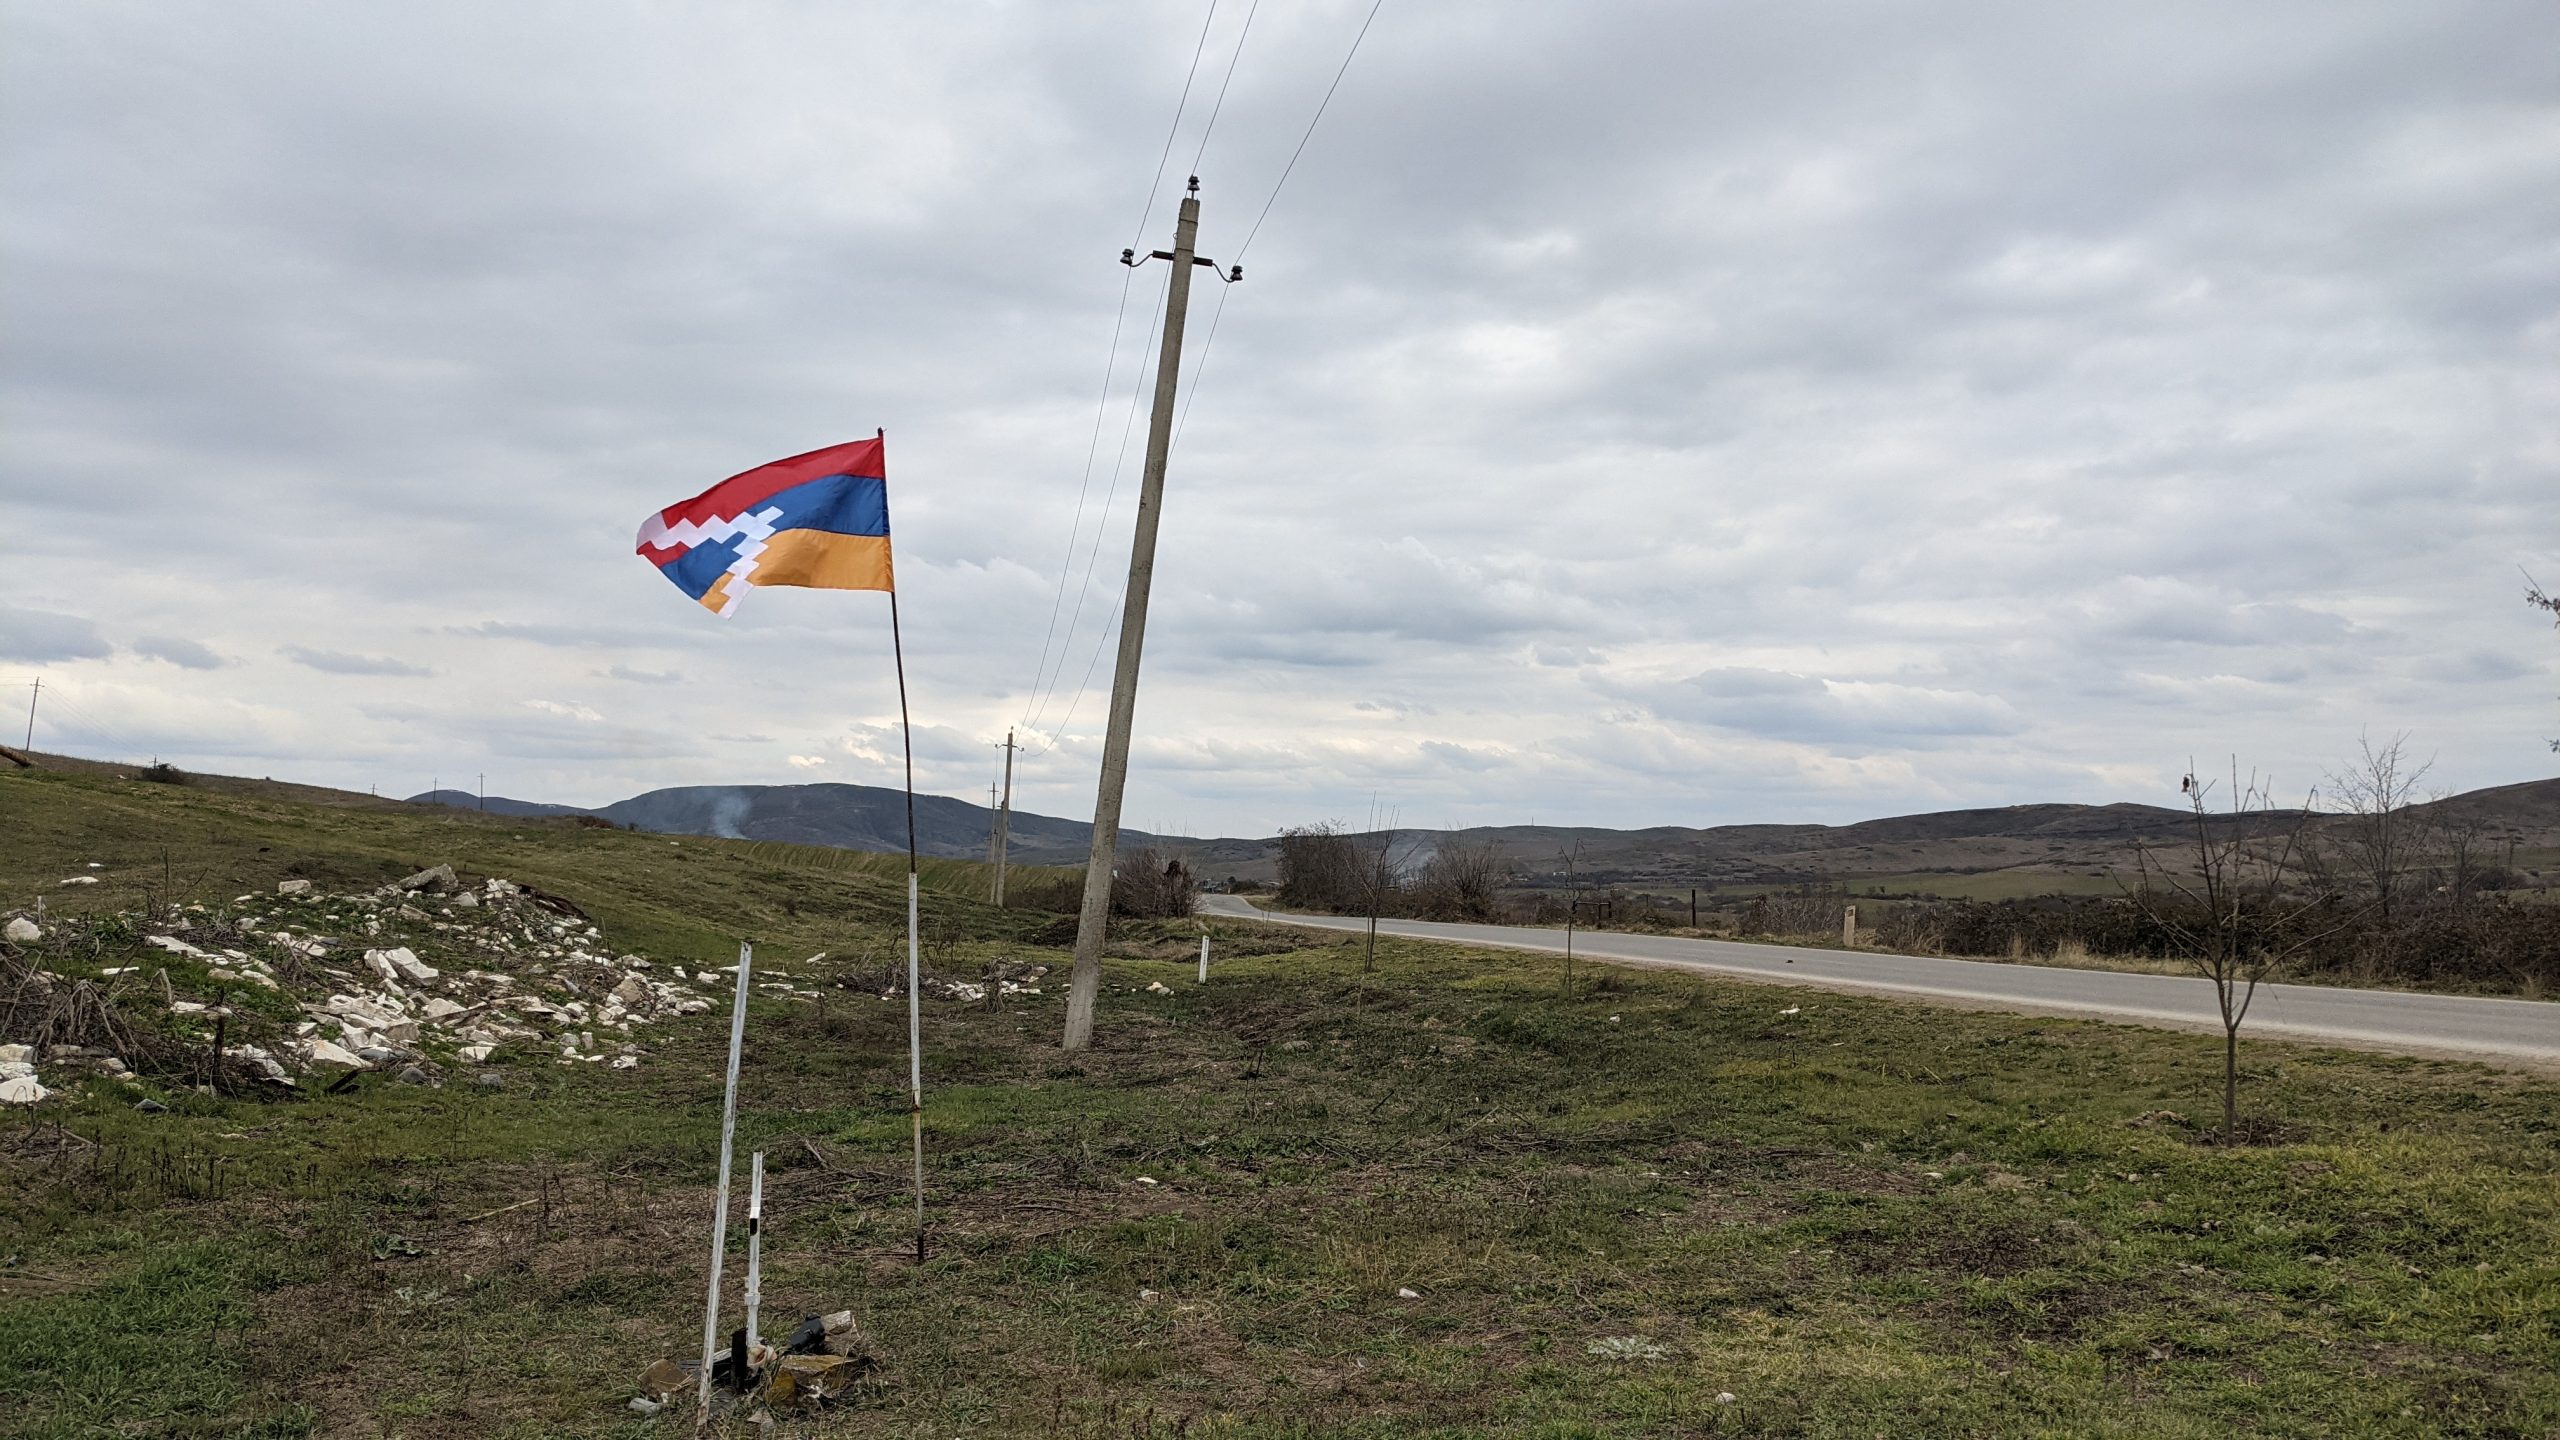 Karabakh mother’s search for food results in death of two children